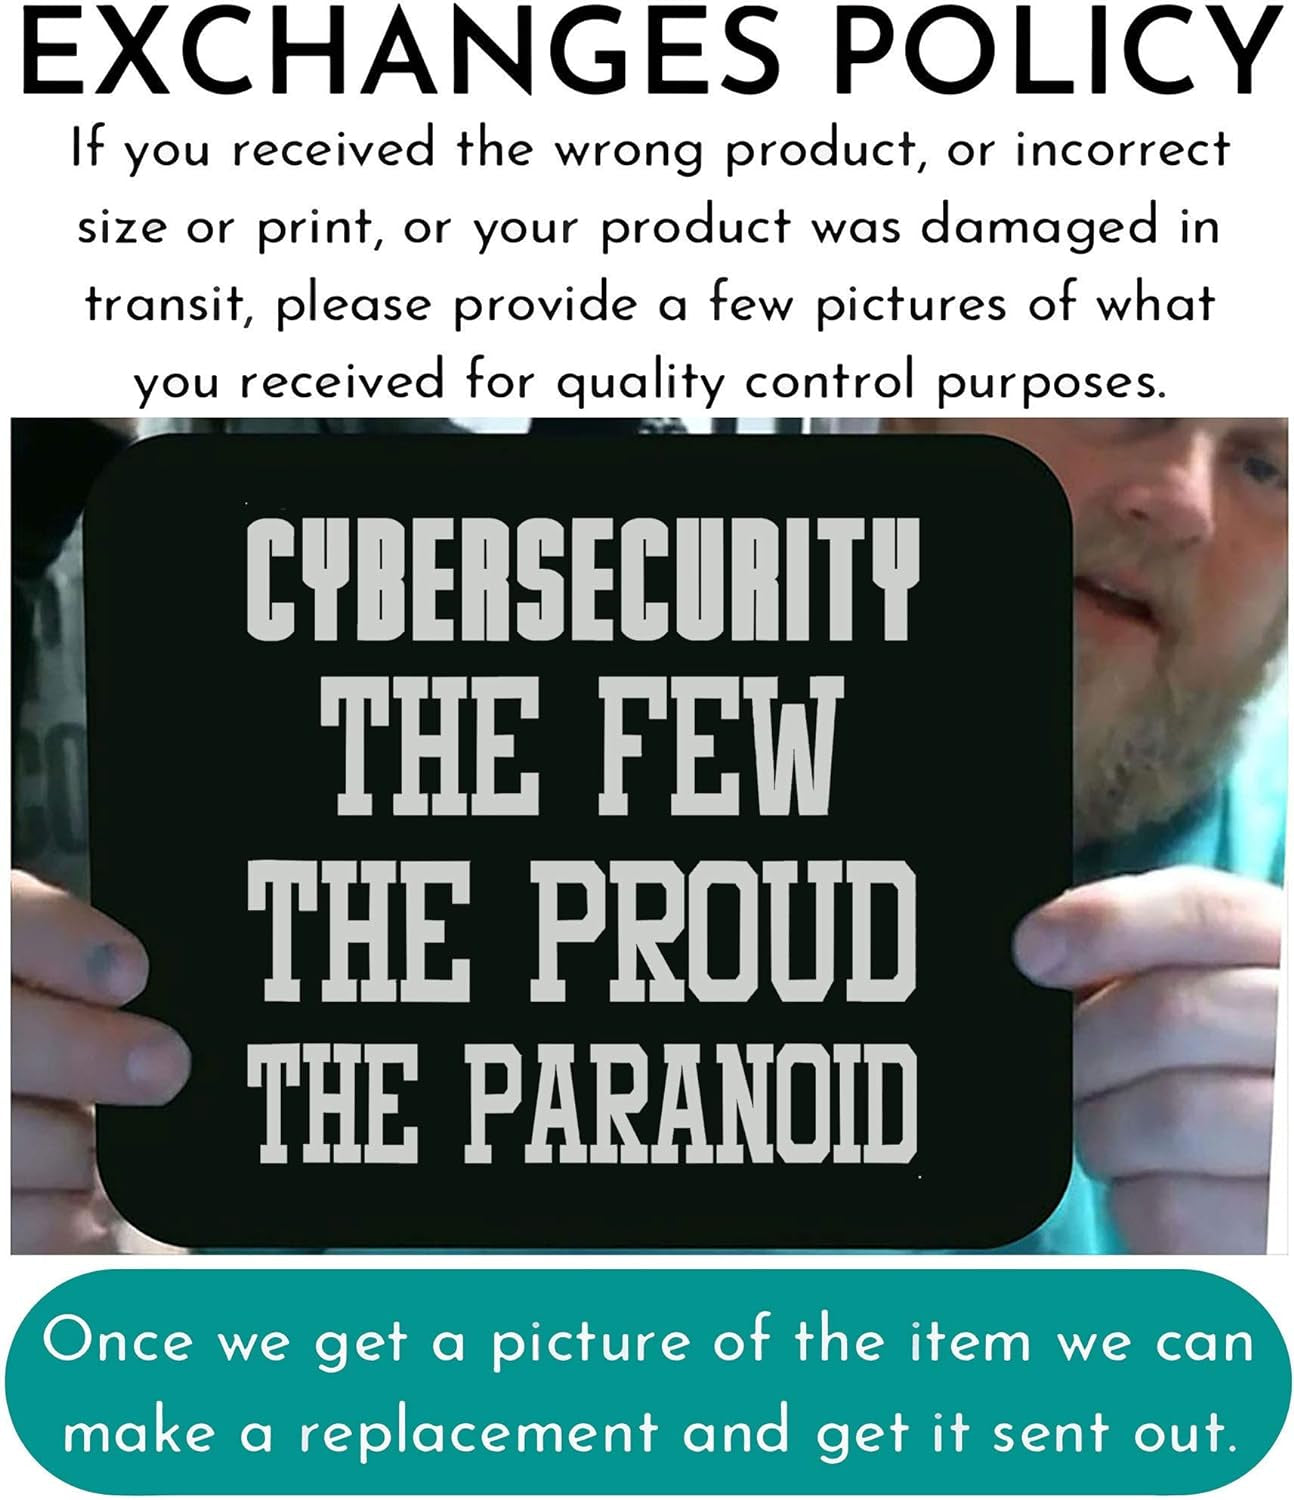 Funny Mousepad Joke Gag Gift - Cybersecurity the Few the Proud the Paranoid Funny Office Canvas 9Inch Mouse Mat Mouse Pad